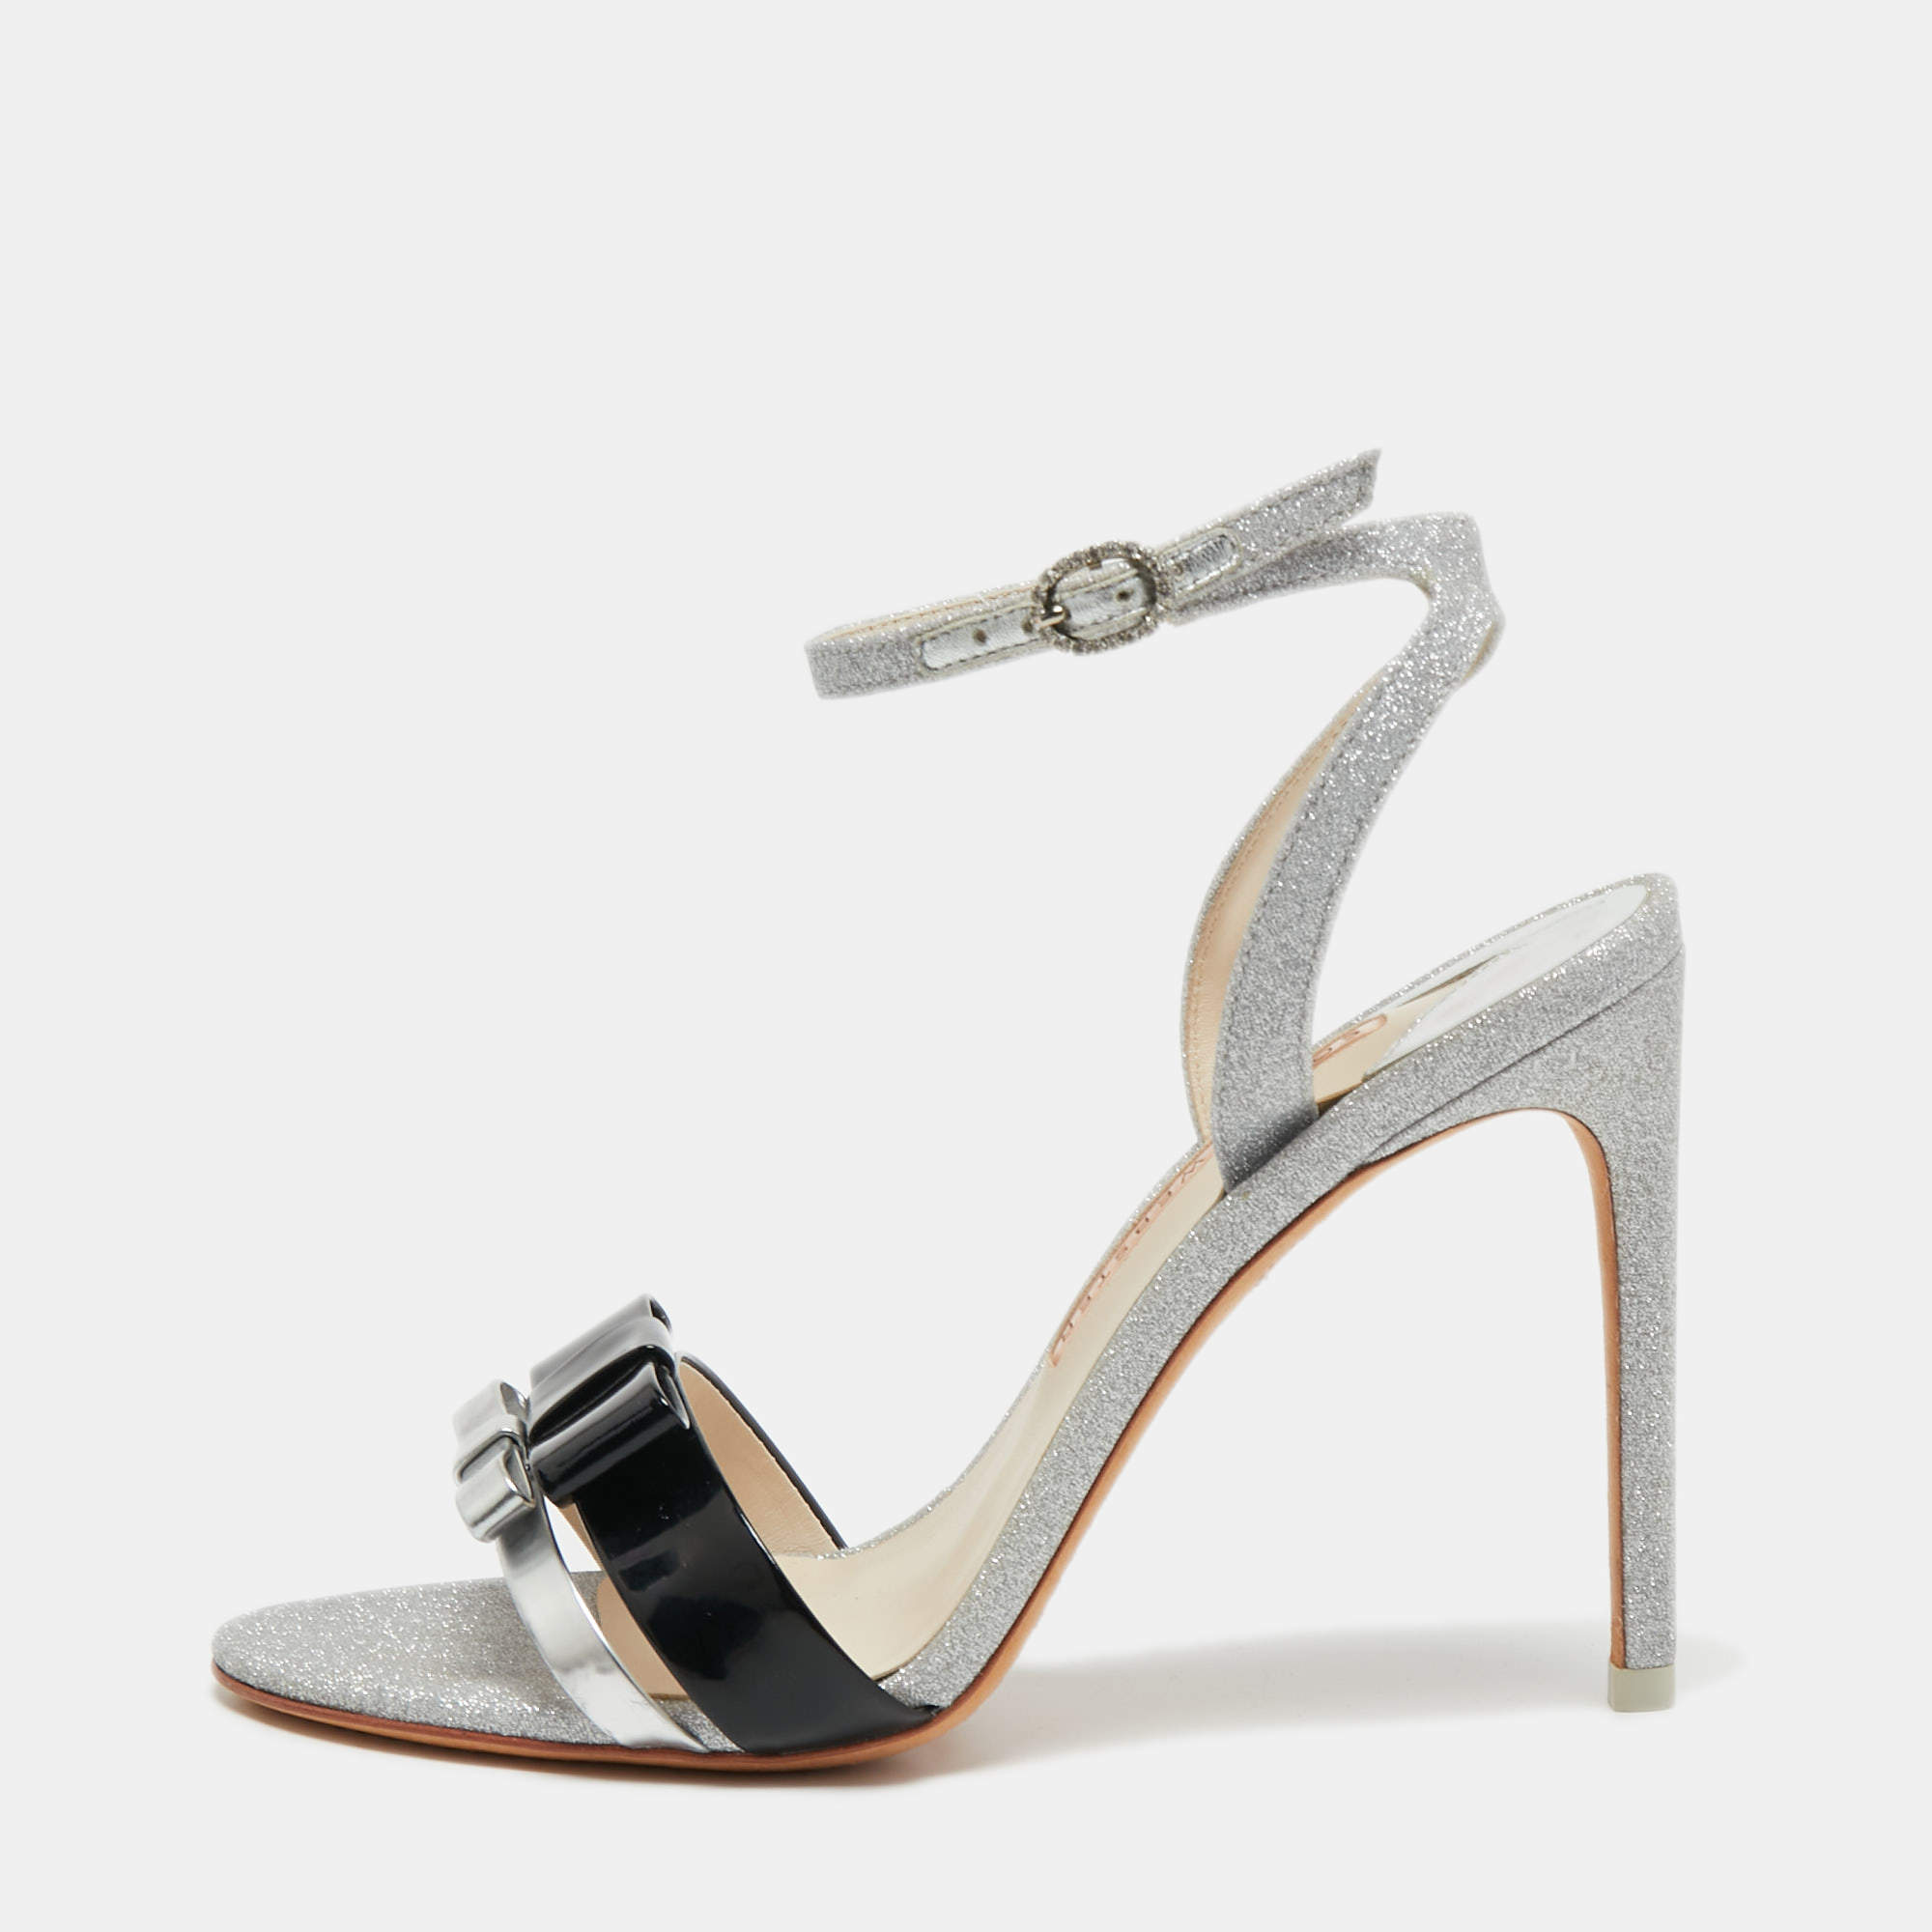 Sophia Webster Silver/Black Glitter, Patent and Leather Andie Sandals ...